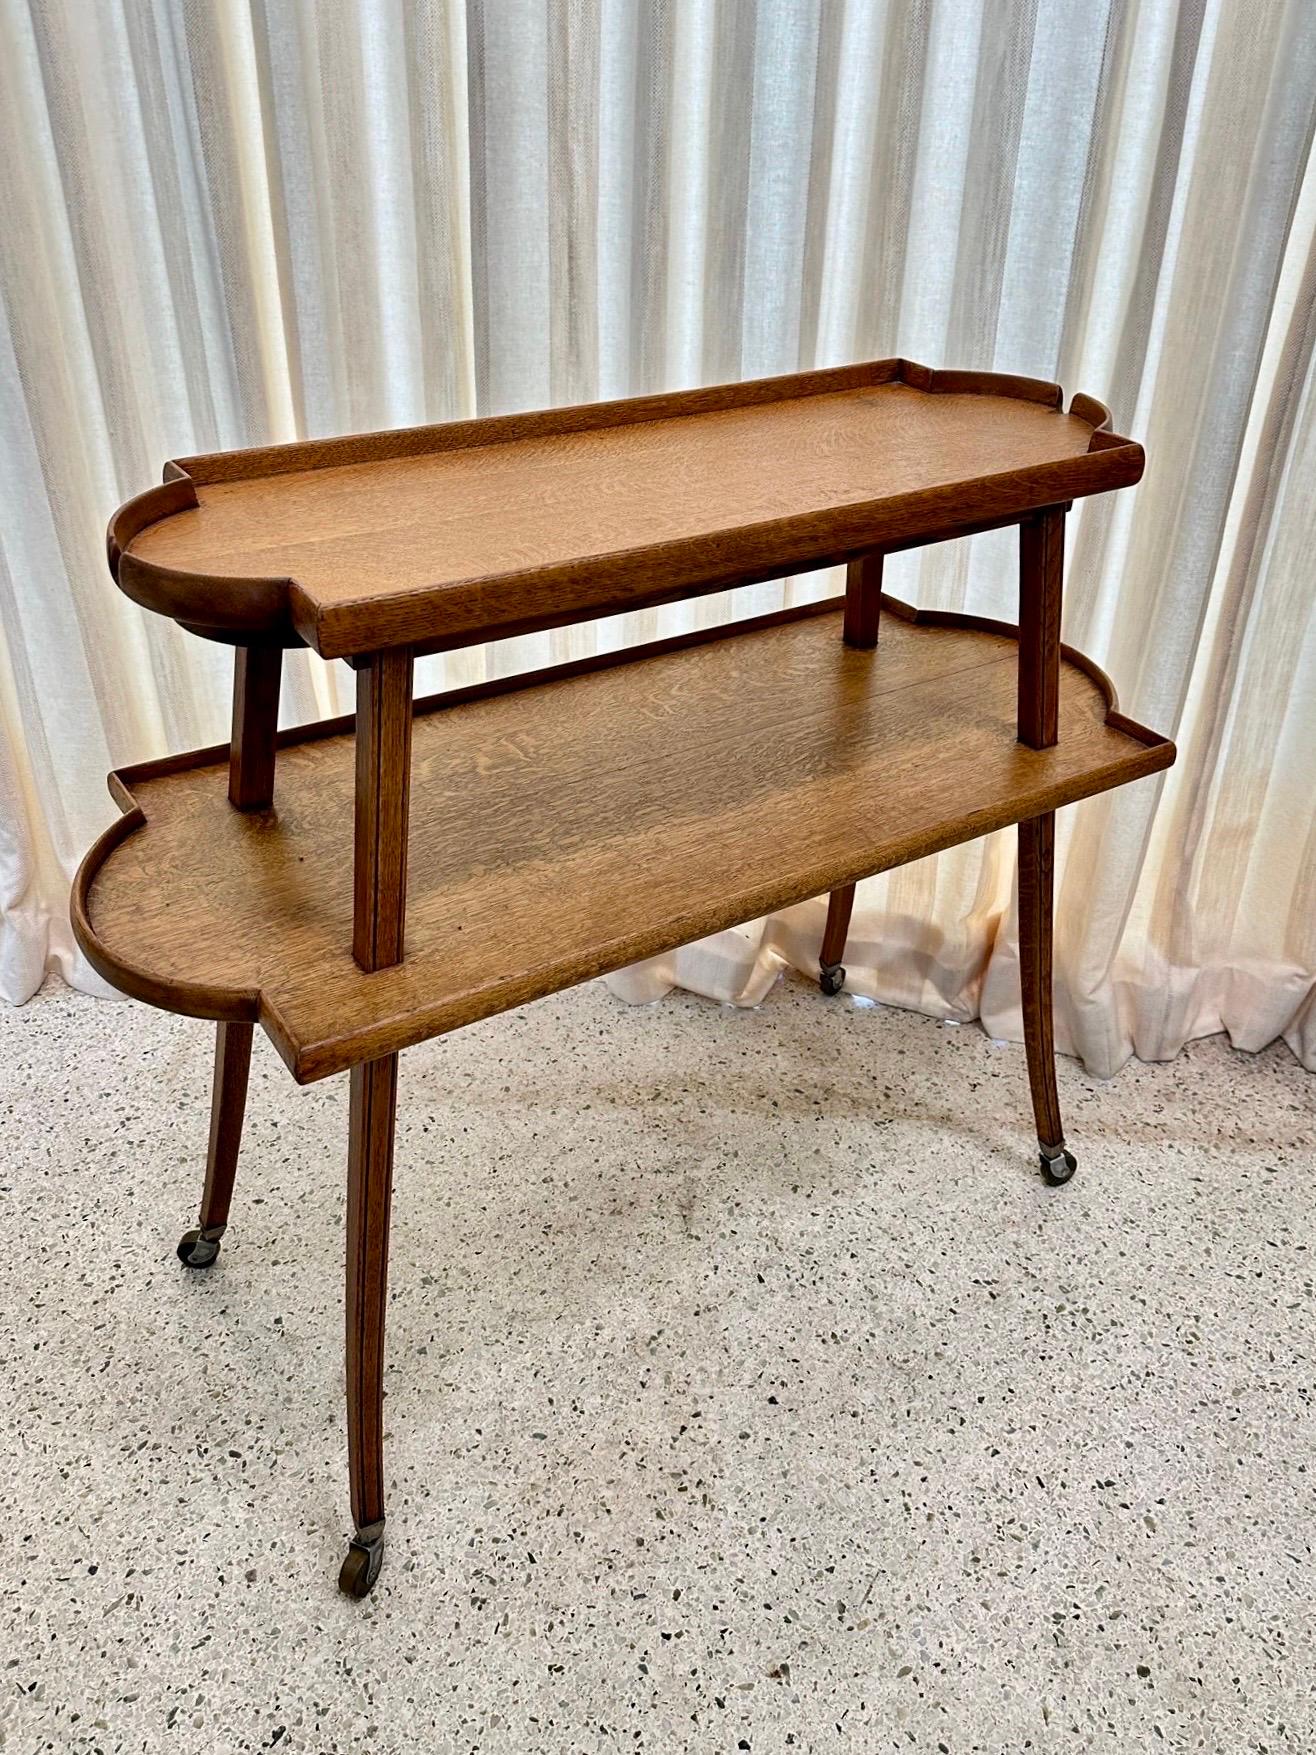 This is a RARE two-tier oak table with tray edges and tapering legs on casters.   This elegant and beautiful table shows its rich history and would be perfect for display or serving desserts, cheeses and tea/coffee, liquor bar service.